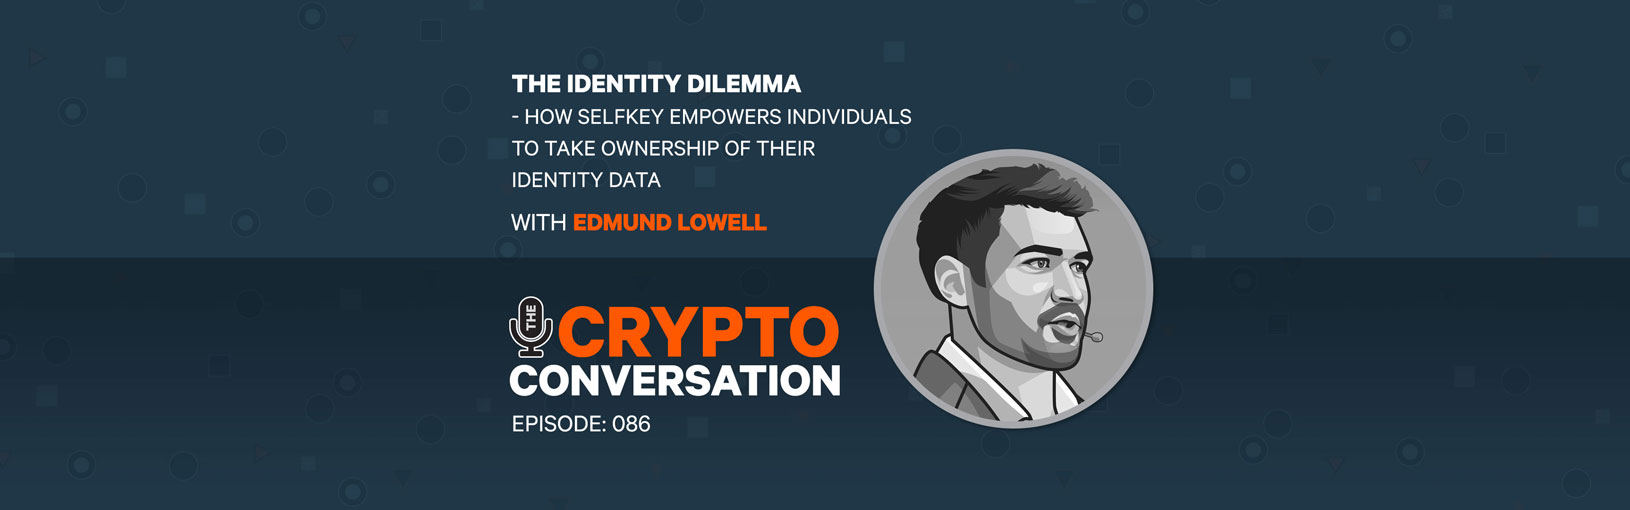 Selfkey is empowering individuals to take back ownership of their identity data